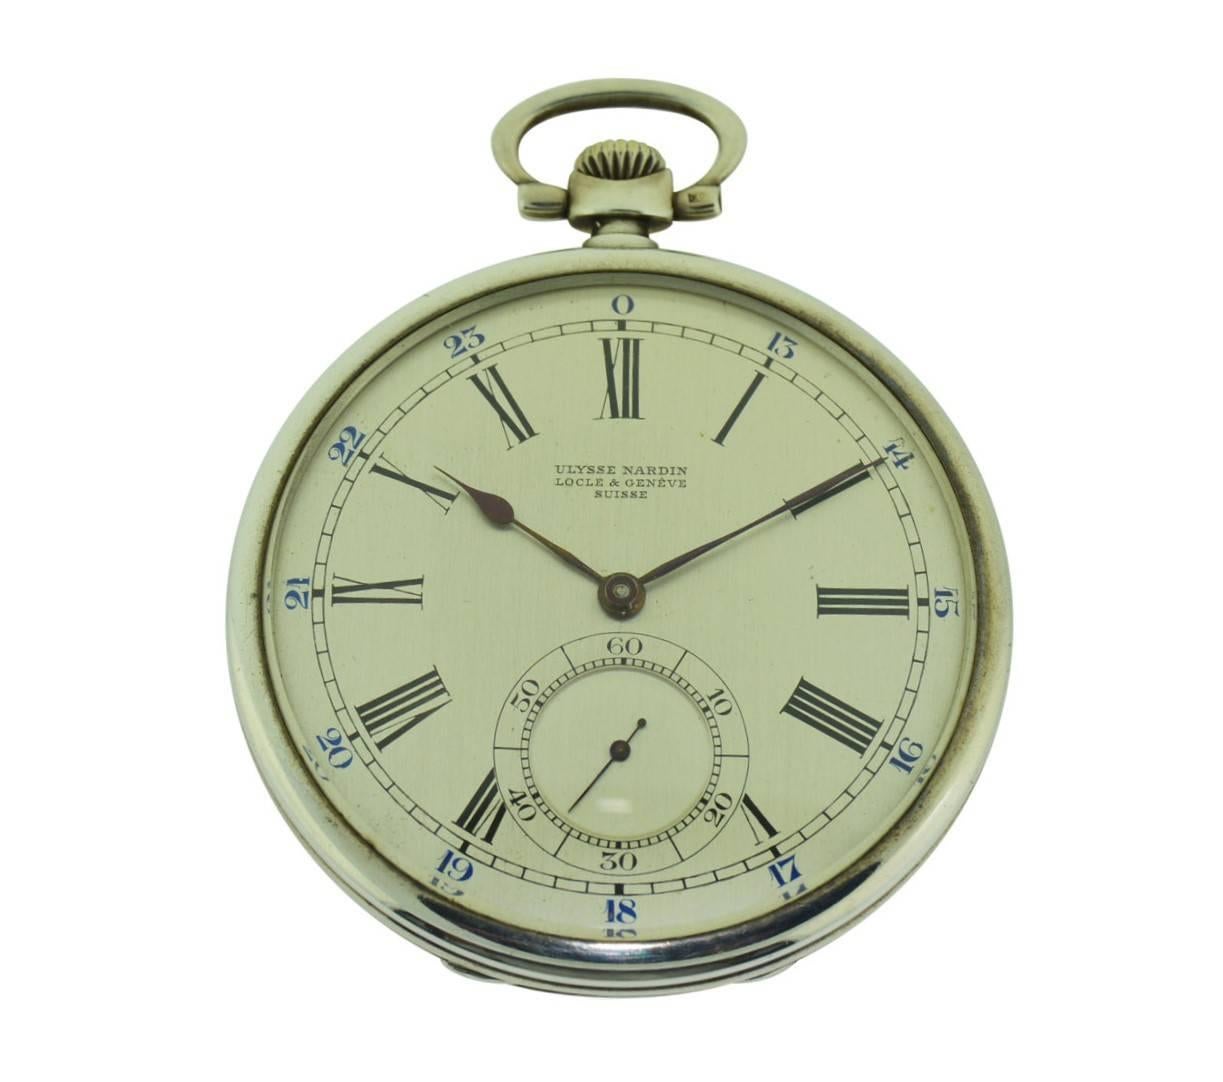 FACTORY / HOUSE: Ulysse Nardin Watch Company
STYLE / REFERENCE: Open Faced Pocket Watch
METAL / MATERIAL: Silver Niello
CIRCA: 1929
DIMENSIONS: 48mm Diameter
MOVEMENT / CALIBER: Manual Winding / 17 Jewels / 17 Lignes
DIAL / HANDS: Original Silvered